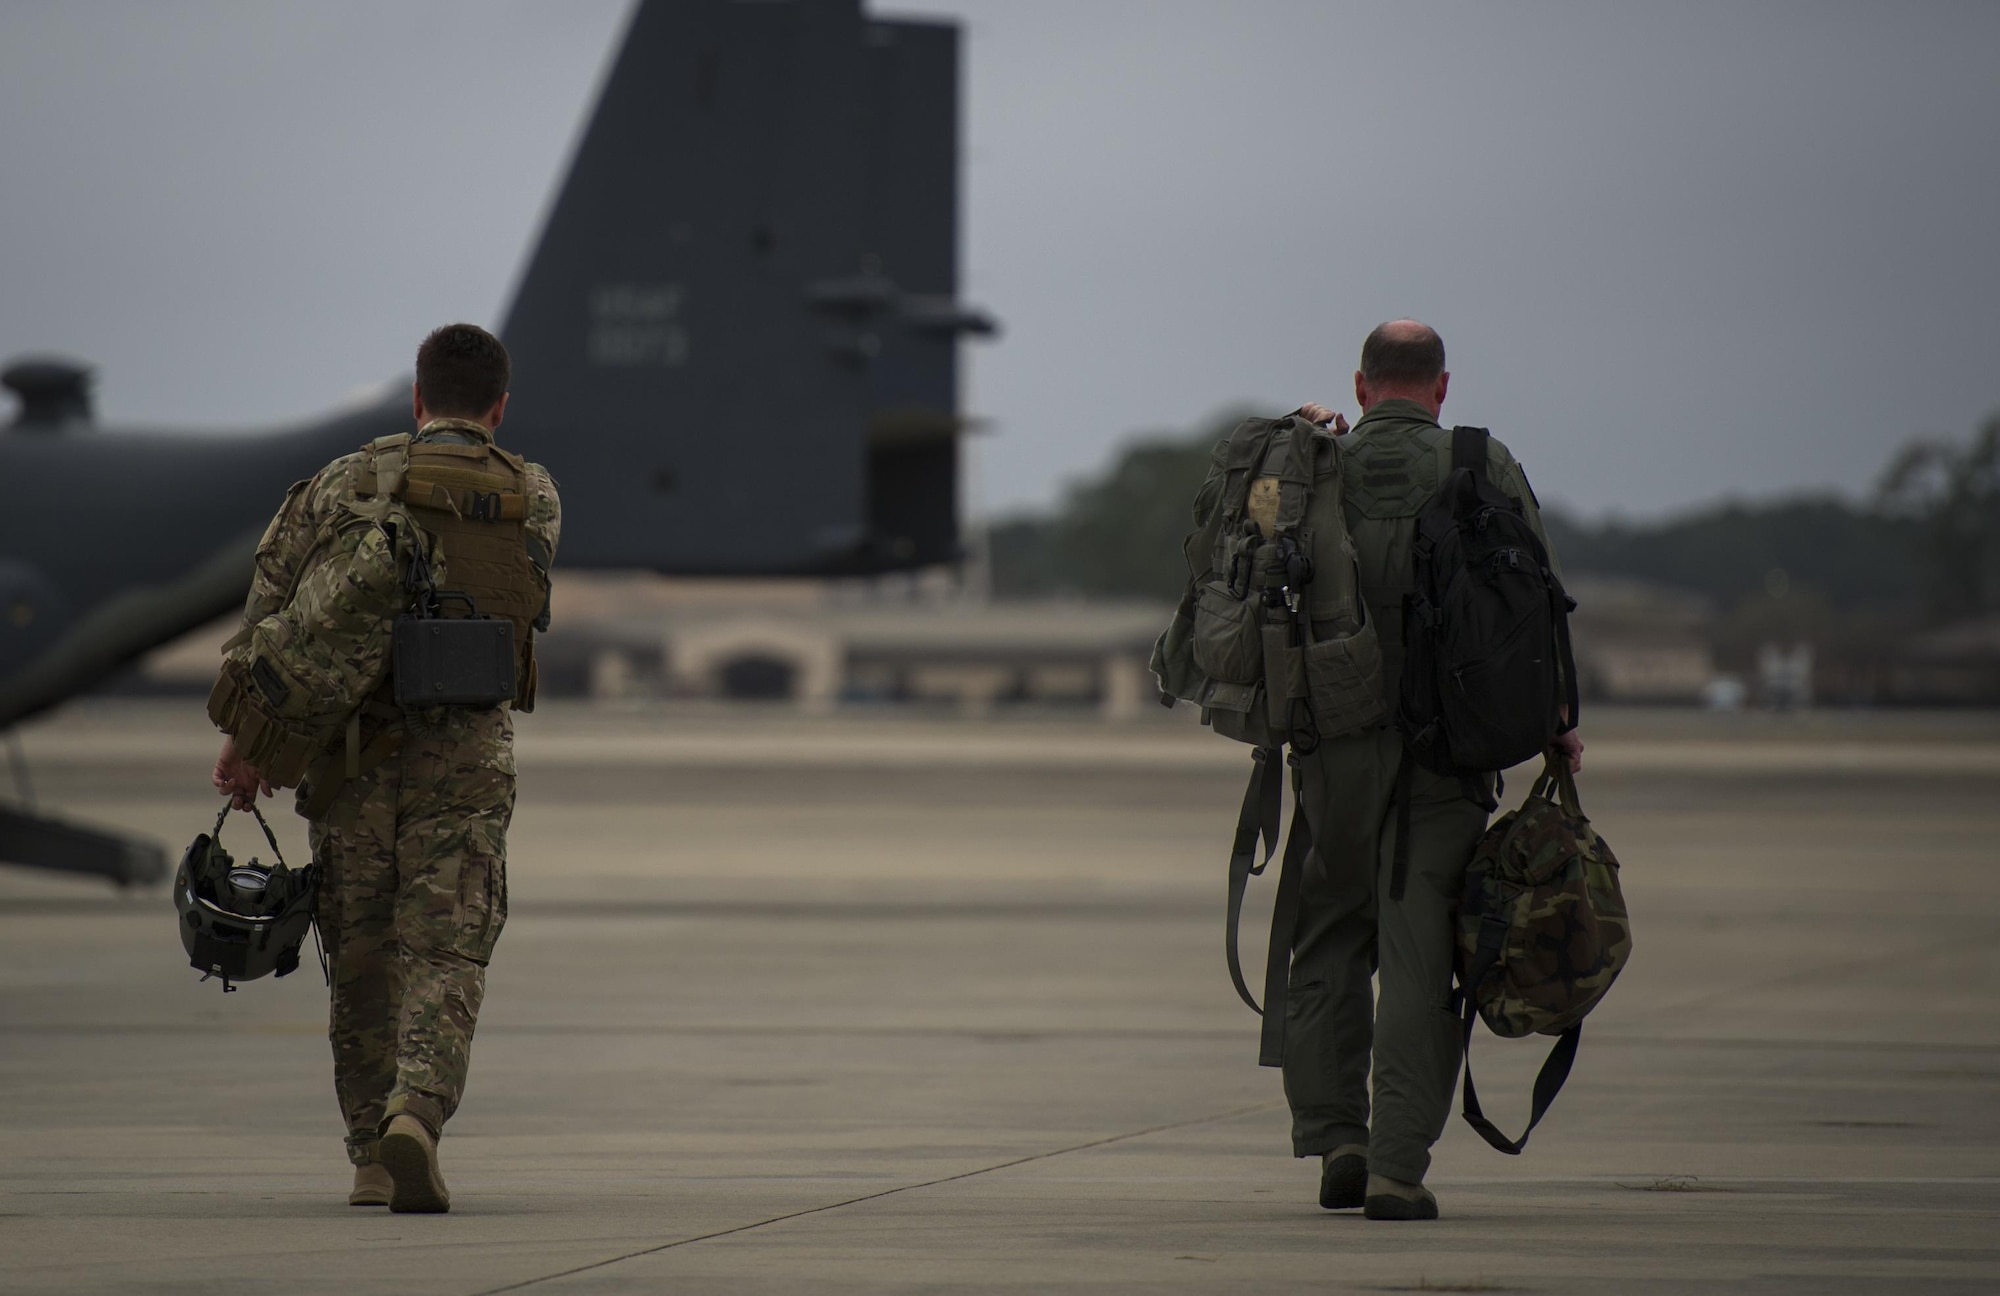 Maj. Nathan Eaton, left, a pilot with the 8th Special Operations Squadron, walks with Maj. Gen. Eugene Haase, vice commander of Air Force Special Operations Command, to an 8th SOS CV-22 Osprey tiltrotor aircraft before Haase’s final flight at Hurlburt Field, Fla., March 24, 2017. Haase has logged more than 3,500 flight hours in his career and served as AFSOC’s vice commander for the past 30 months before his retirement, April 10. (U.S. Air Force photo by Airman 1st Class Joseph Pick)